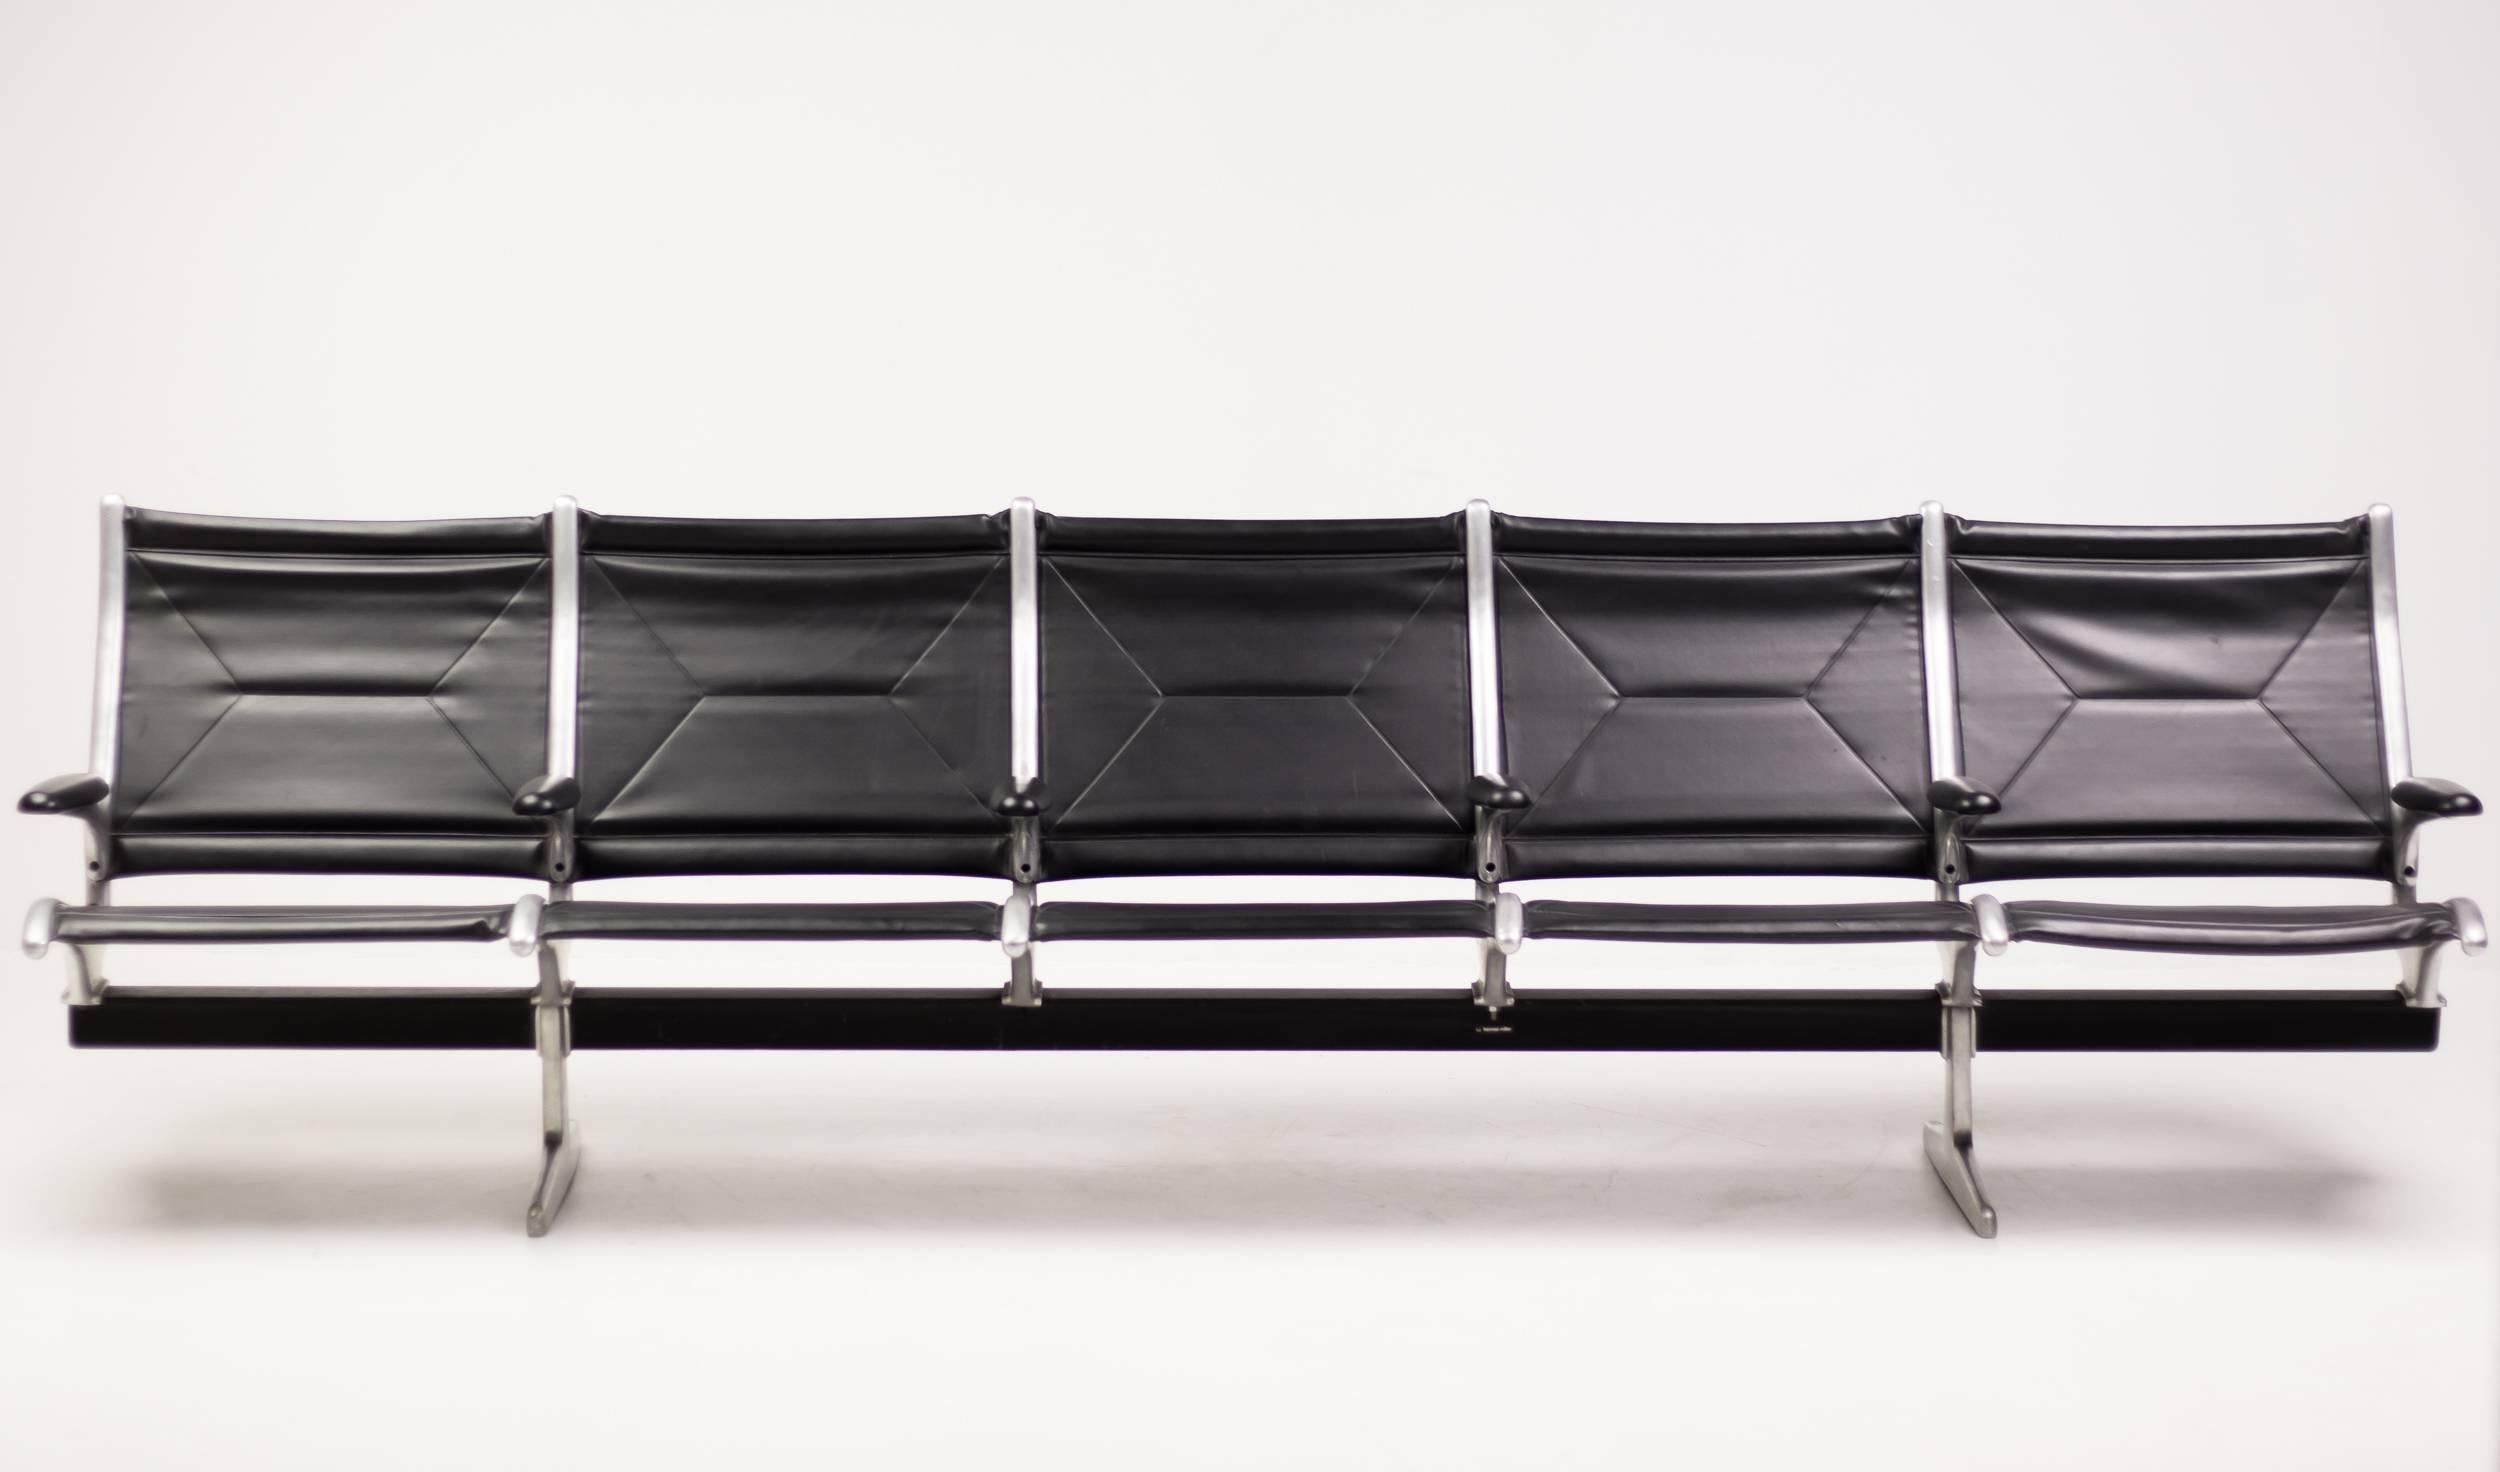 Eames Tandem sling seating serves millions of travellers every day and does it comfortably and reliably.
Designed for O’Hare International Airport in 1962, the sleek, contemporary design remains in style in all kinds of public transport stations.